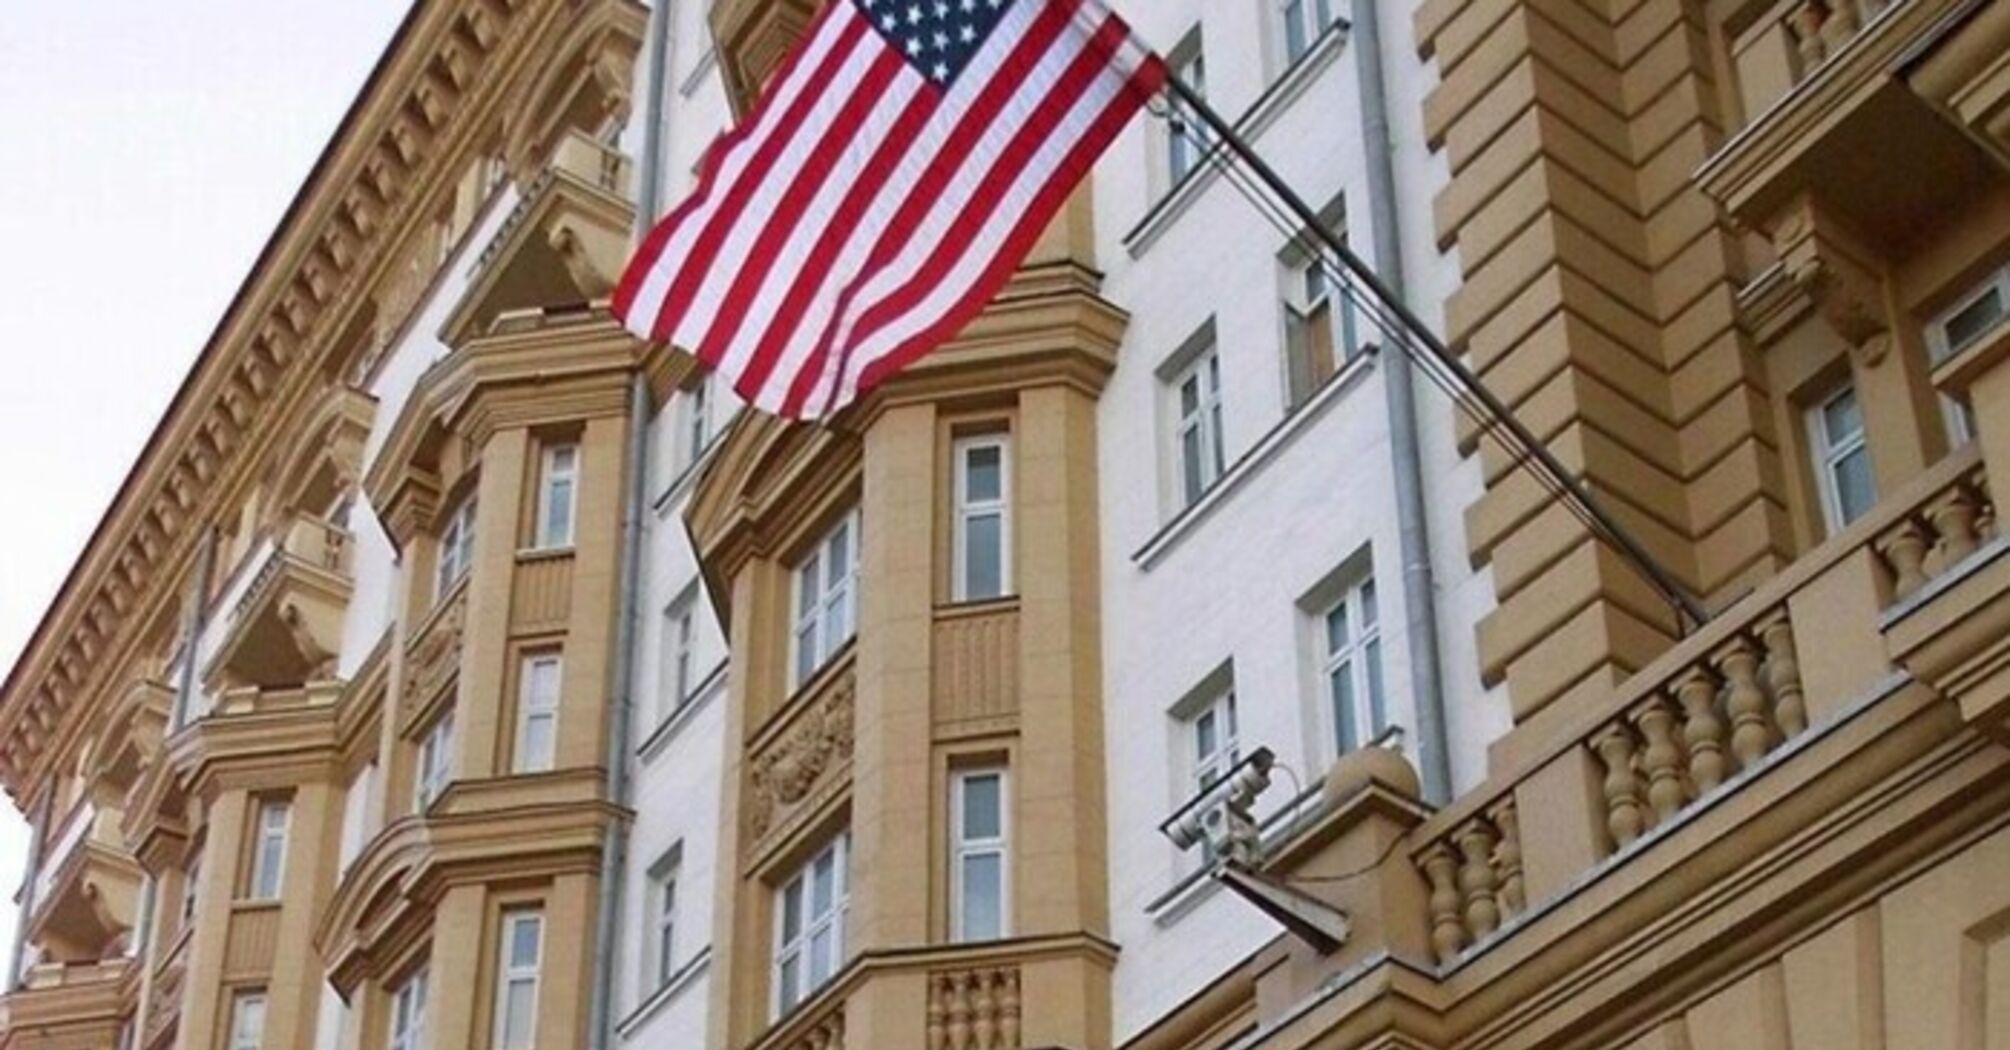 The US Embassy in Russia